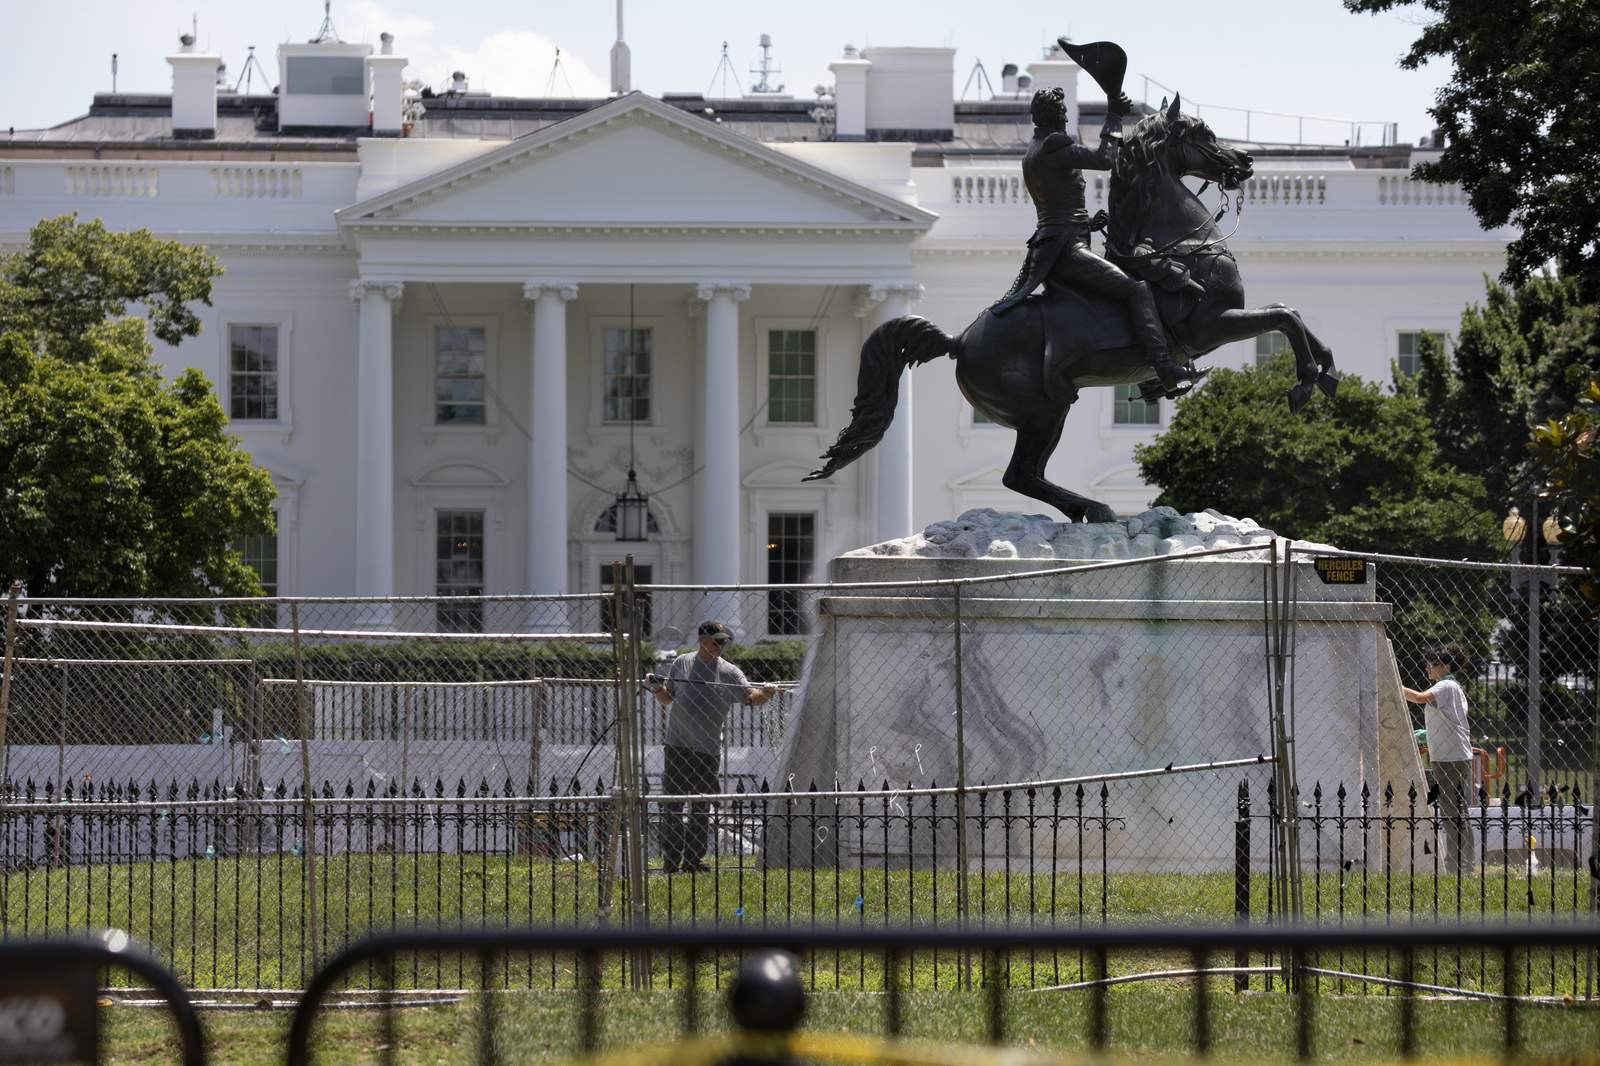 4 men charged in attack on Jackson statue near White House